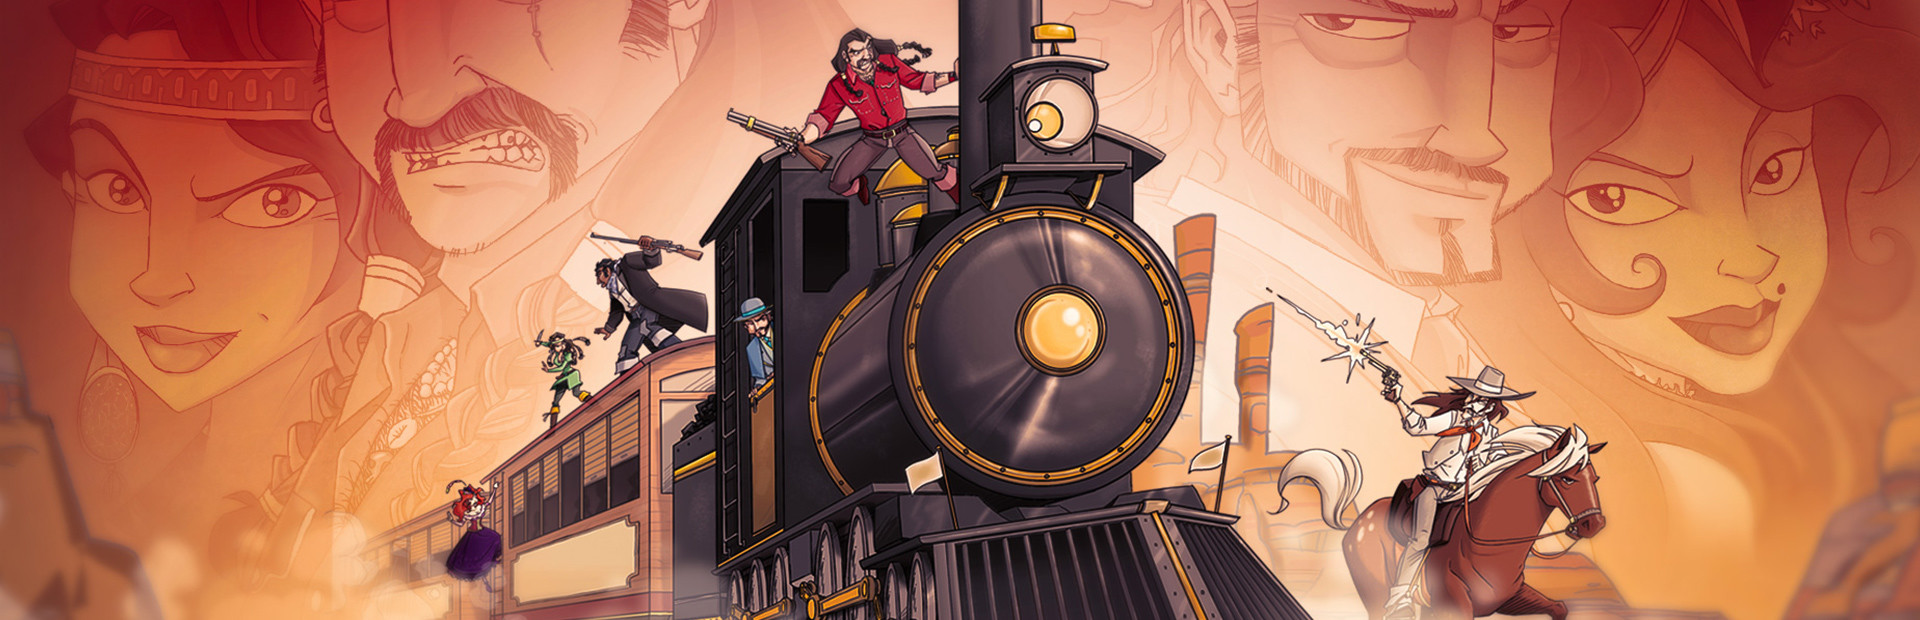 Colt Express cover image